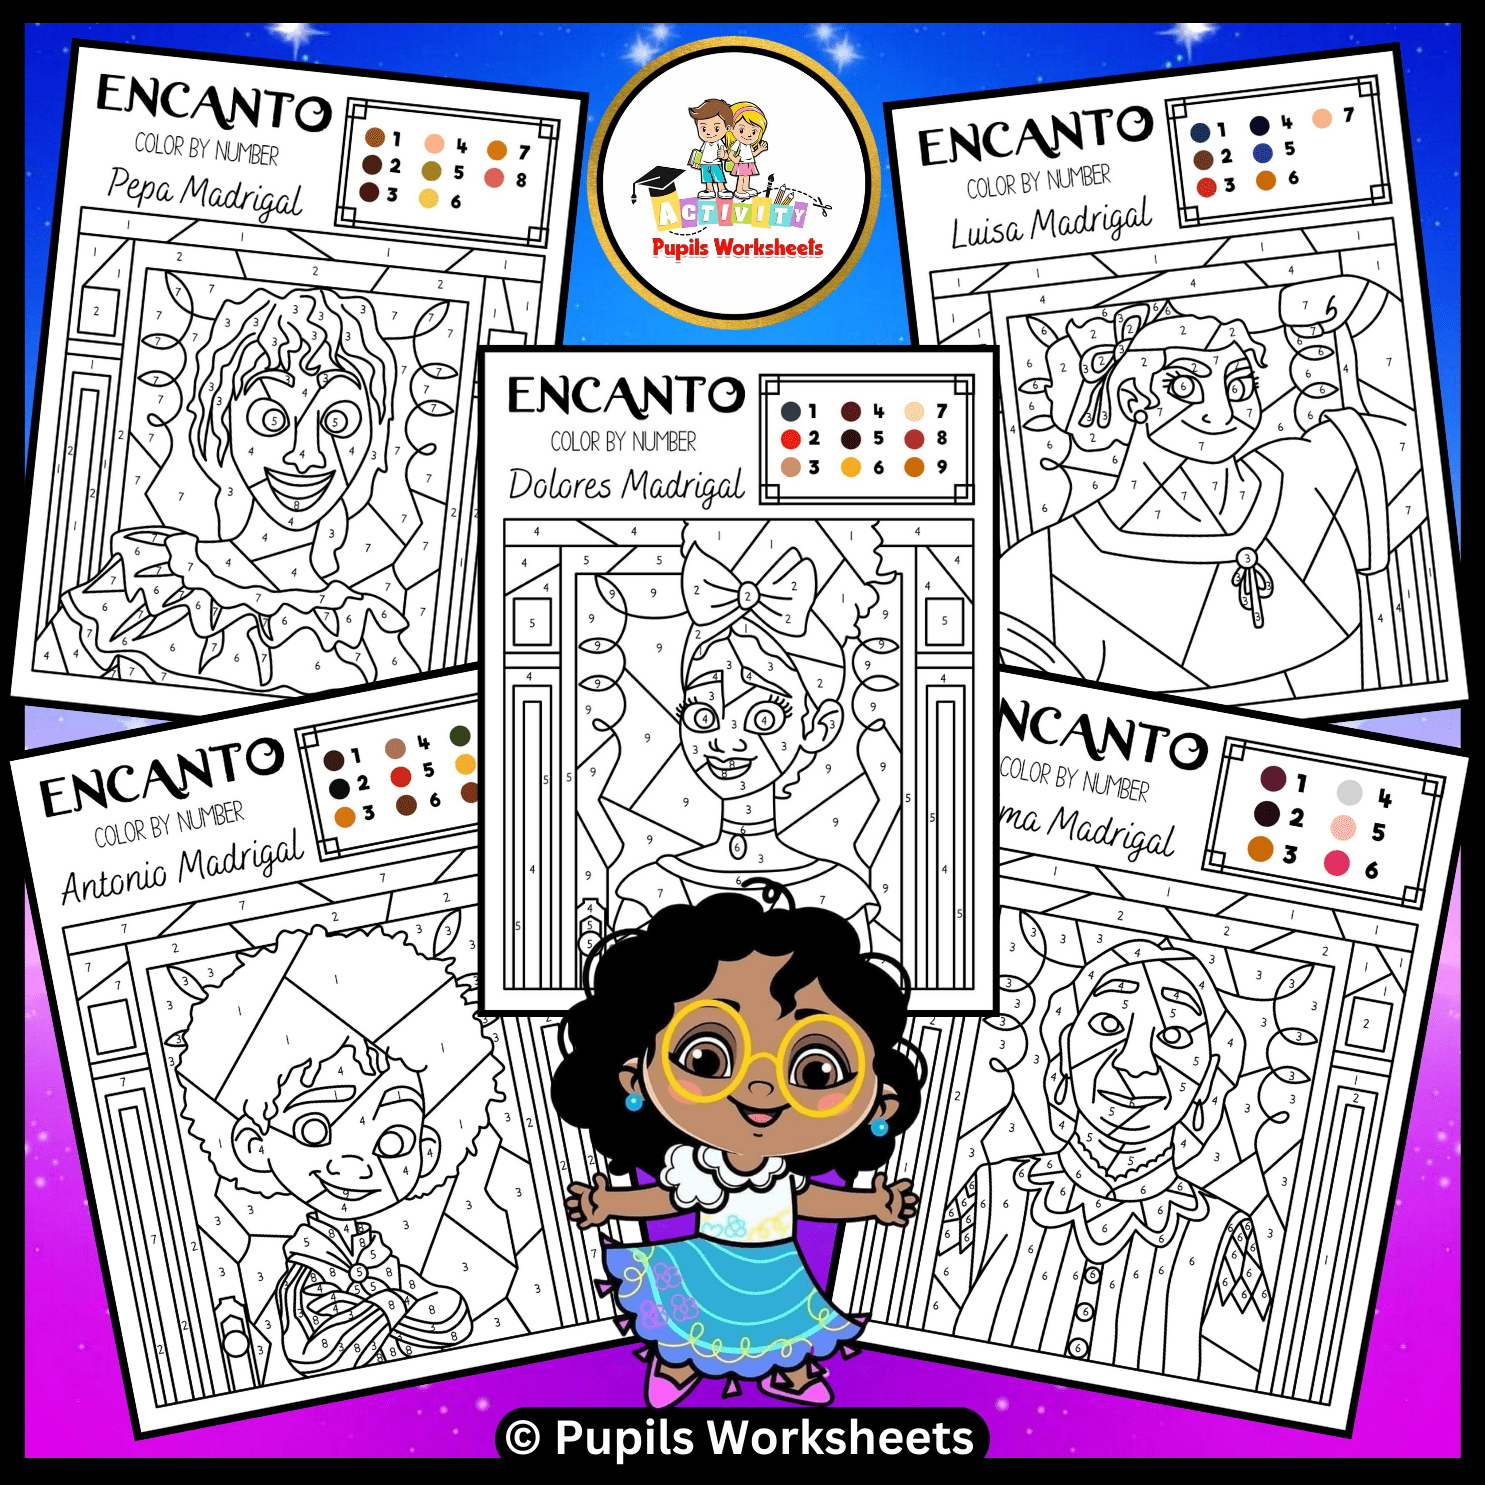 Encanto color by number acitivies i printable coloring pages math worksheets made by teachers